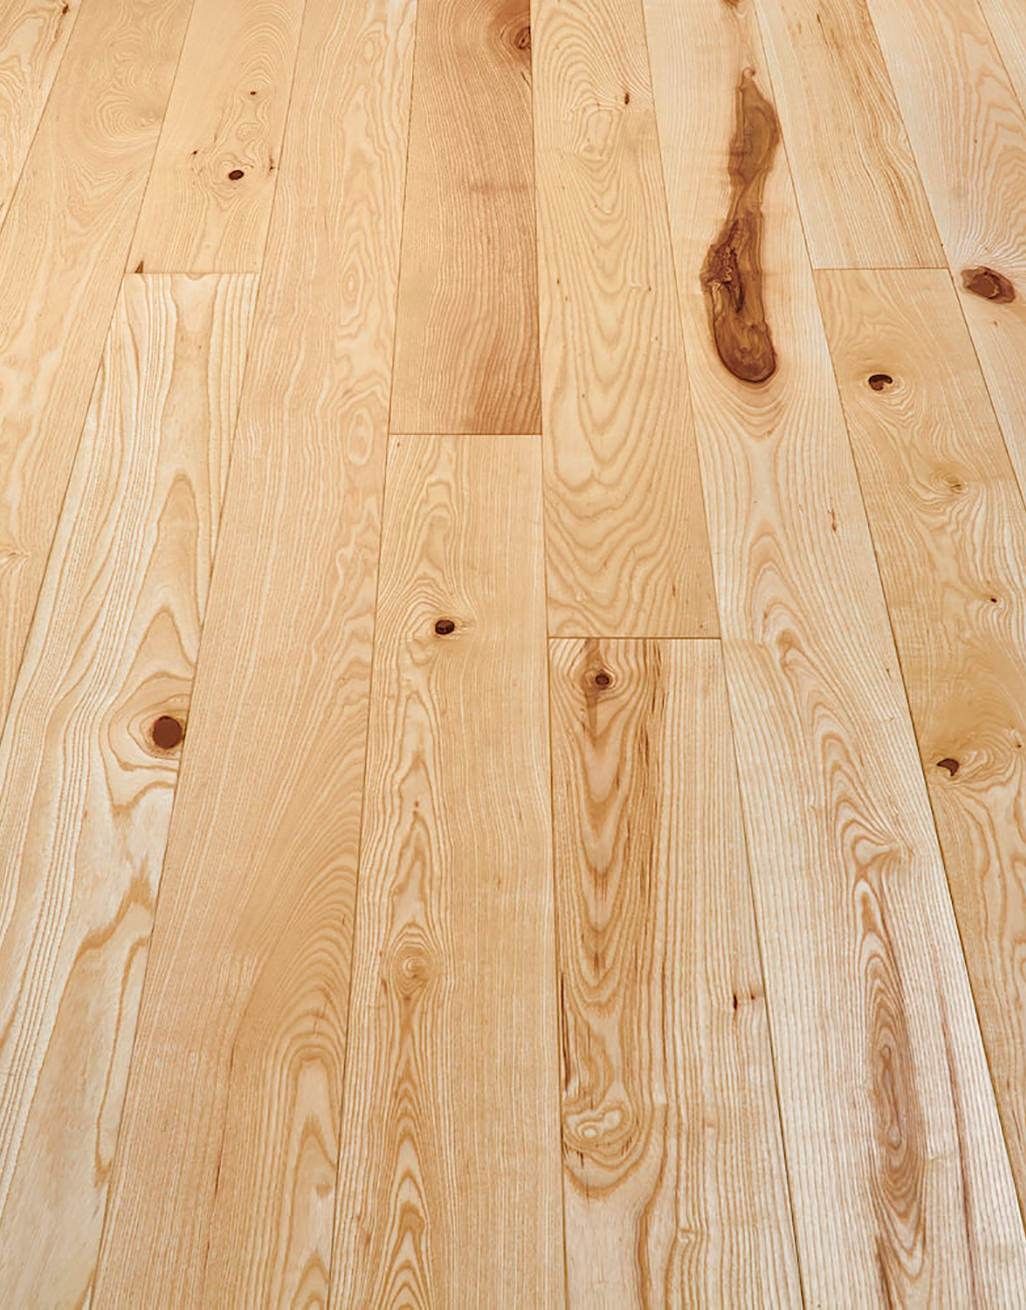 Natural Oiled Ash Solid Wood Flooring, Is Ash Wood Good For Flooring